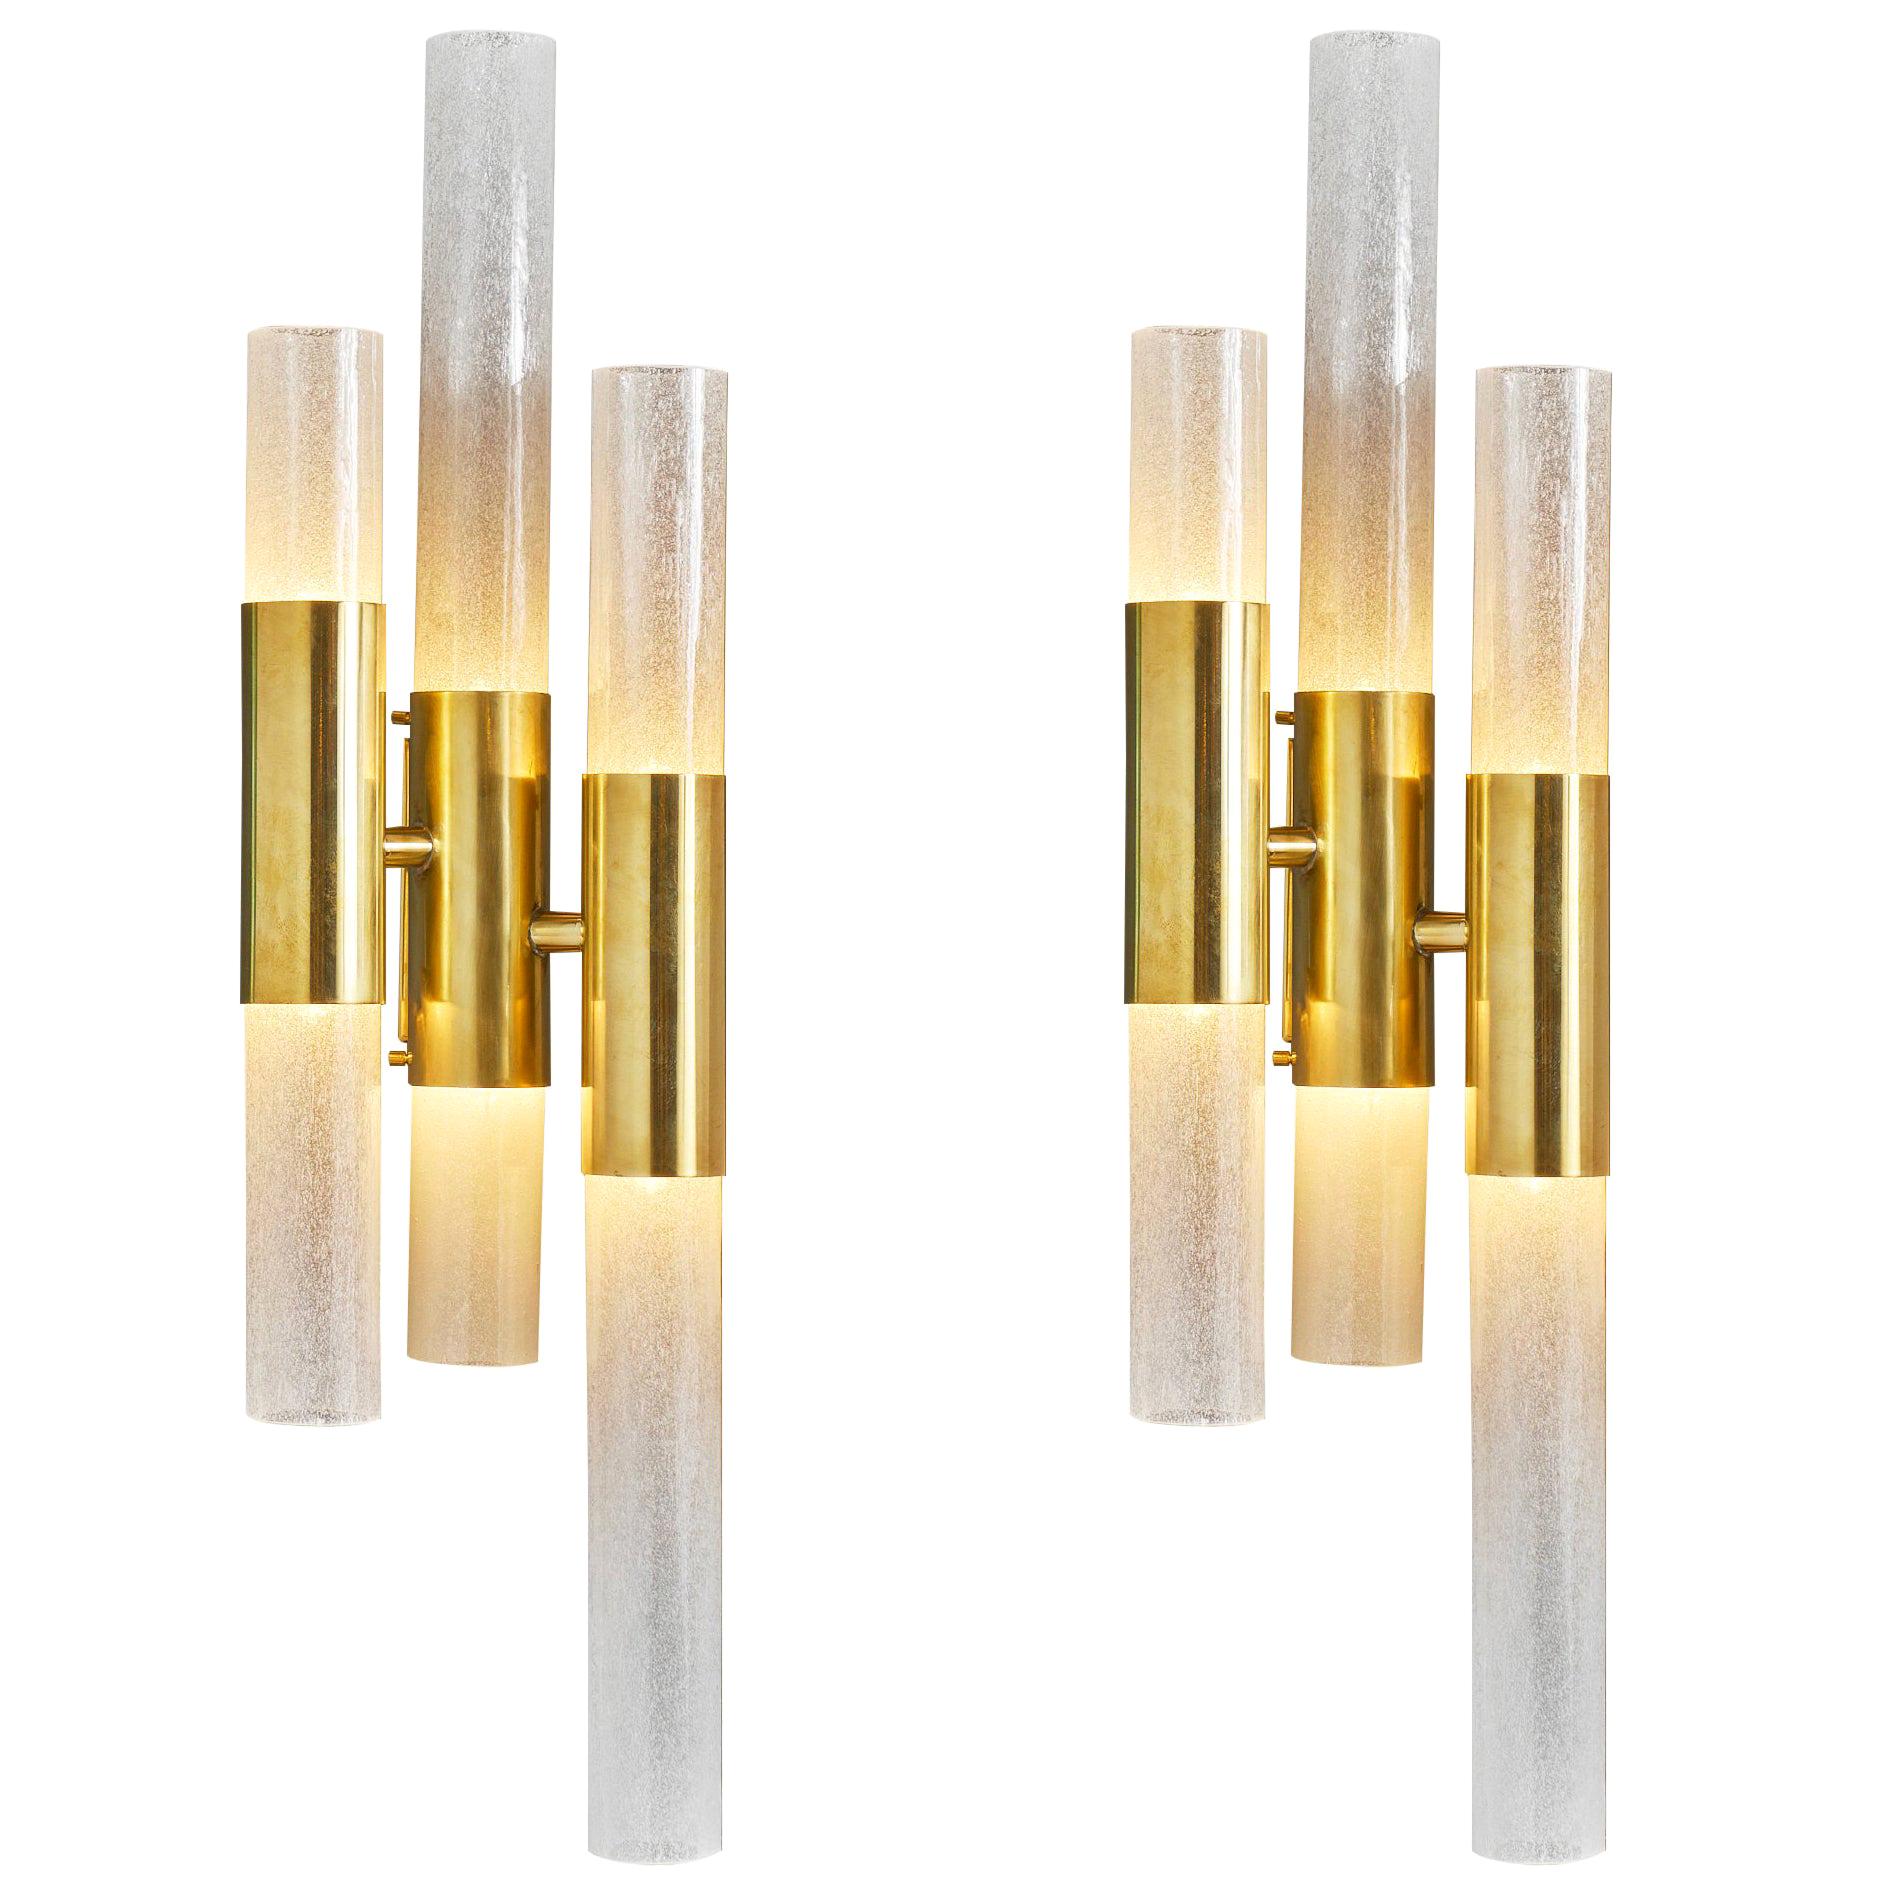 Tube Shaped Murano Glass Sconces For Sale